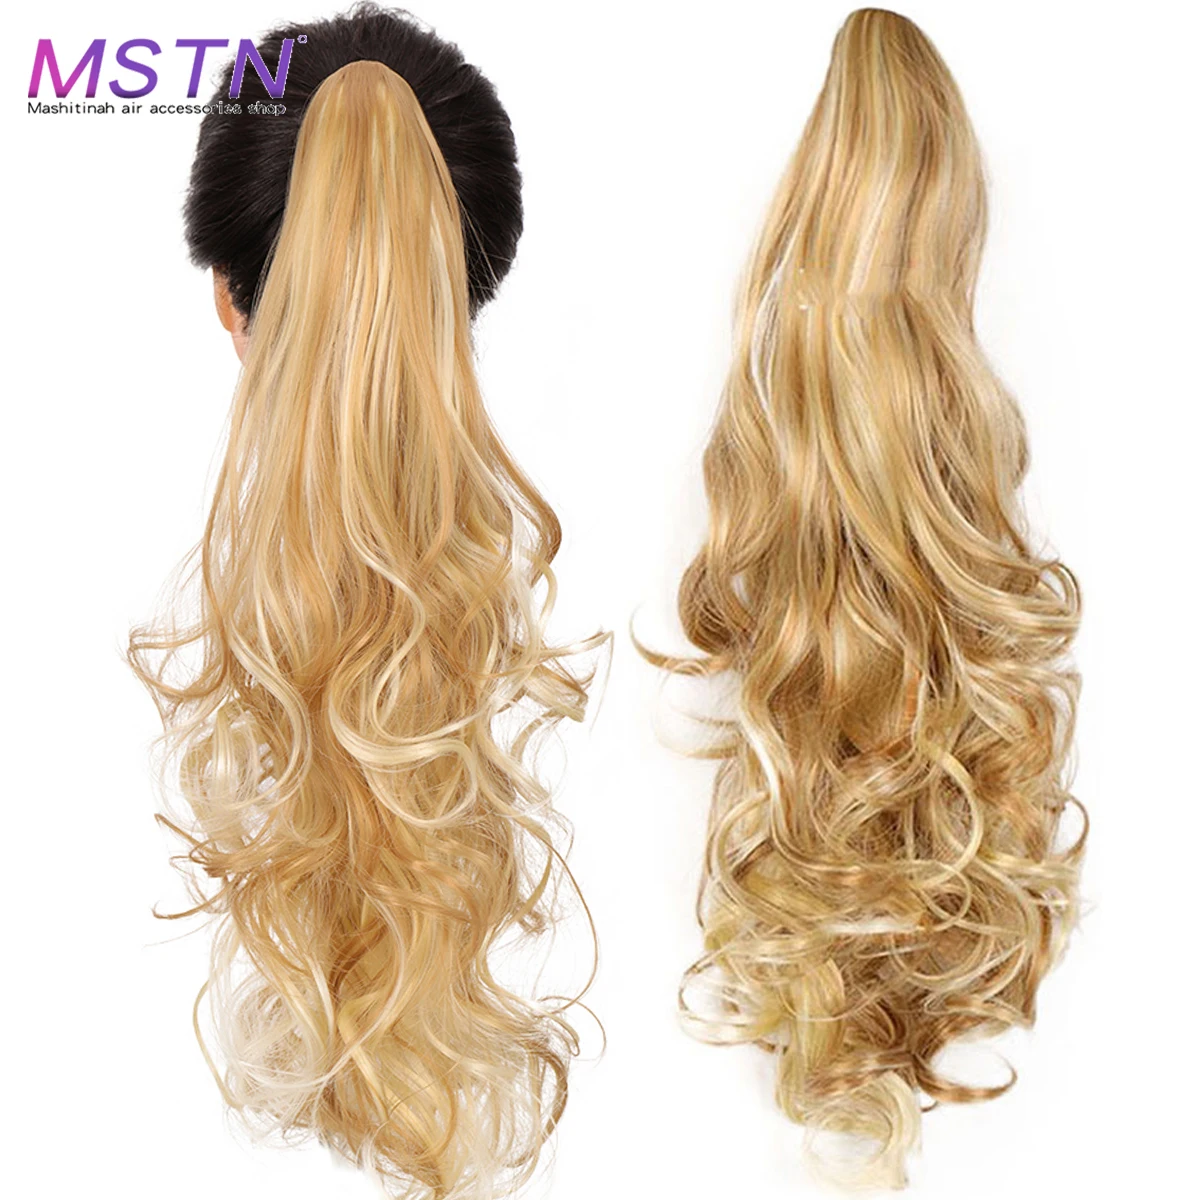 

MSTN Synthetic Heat Resistant Claw Clip On Ponytail Hair Extension Ponytail Extension Hair For Women Pony Tail Hair Hairpiece